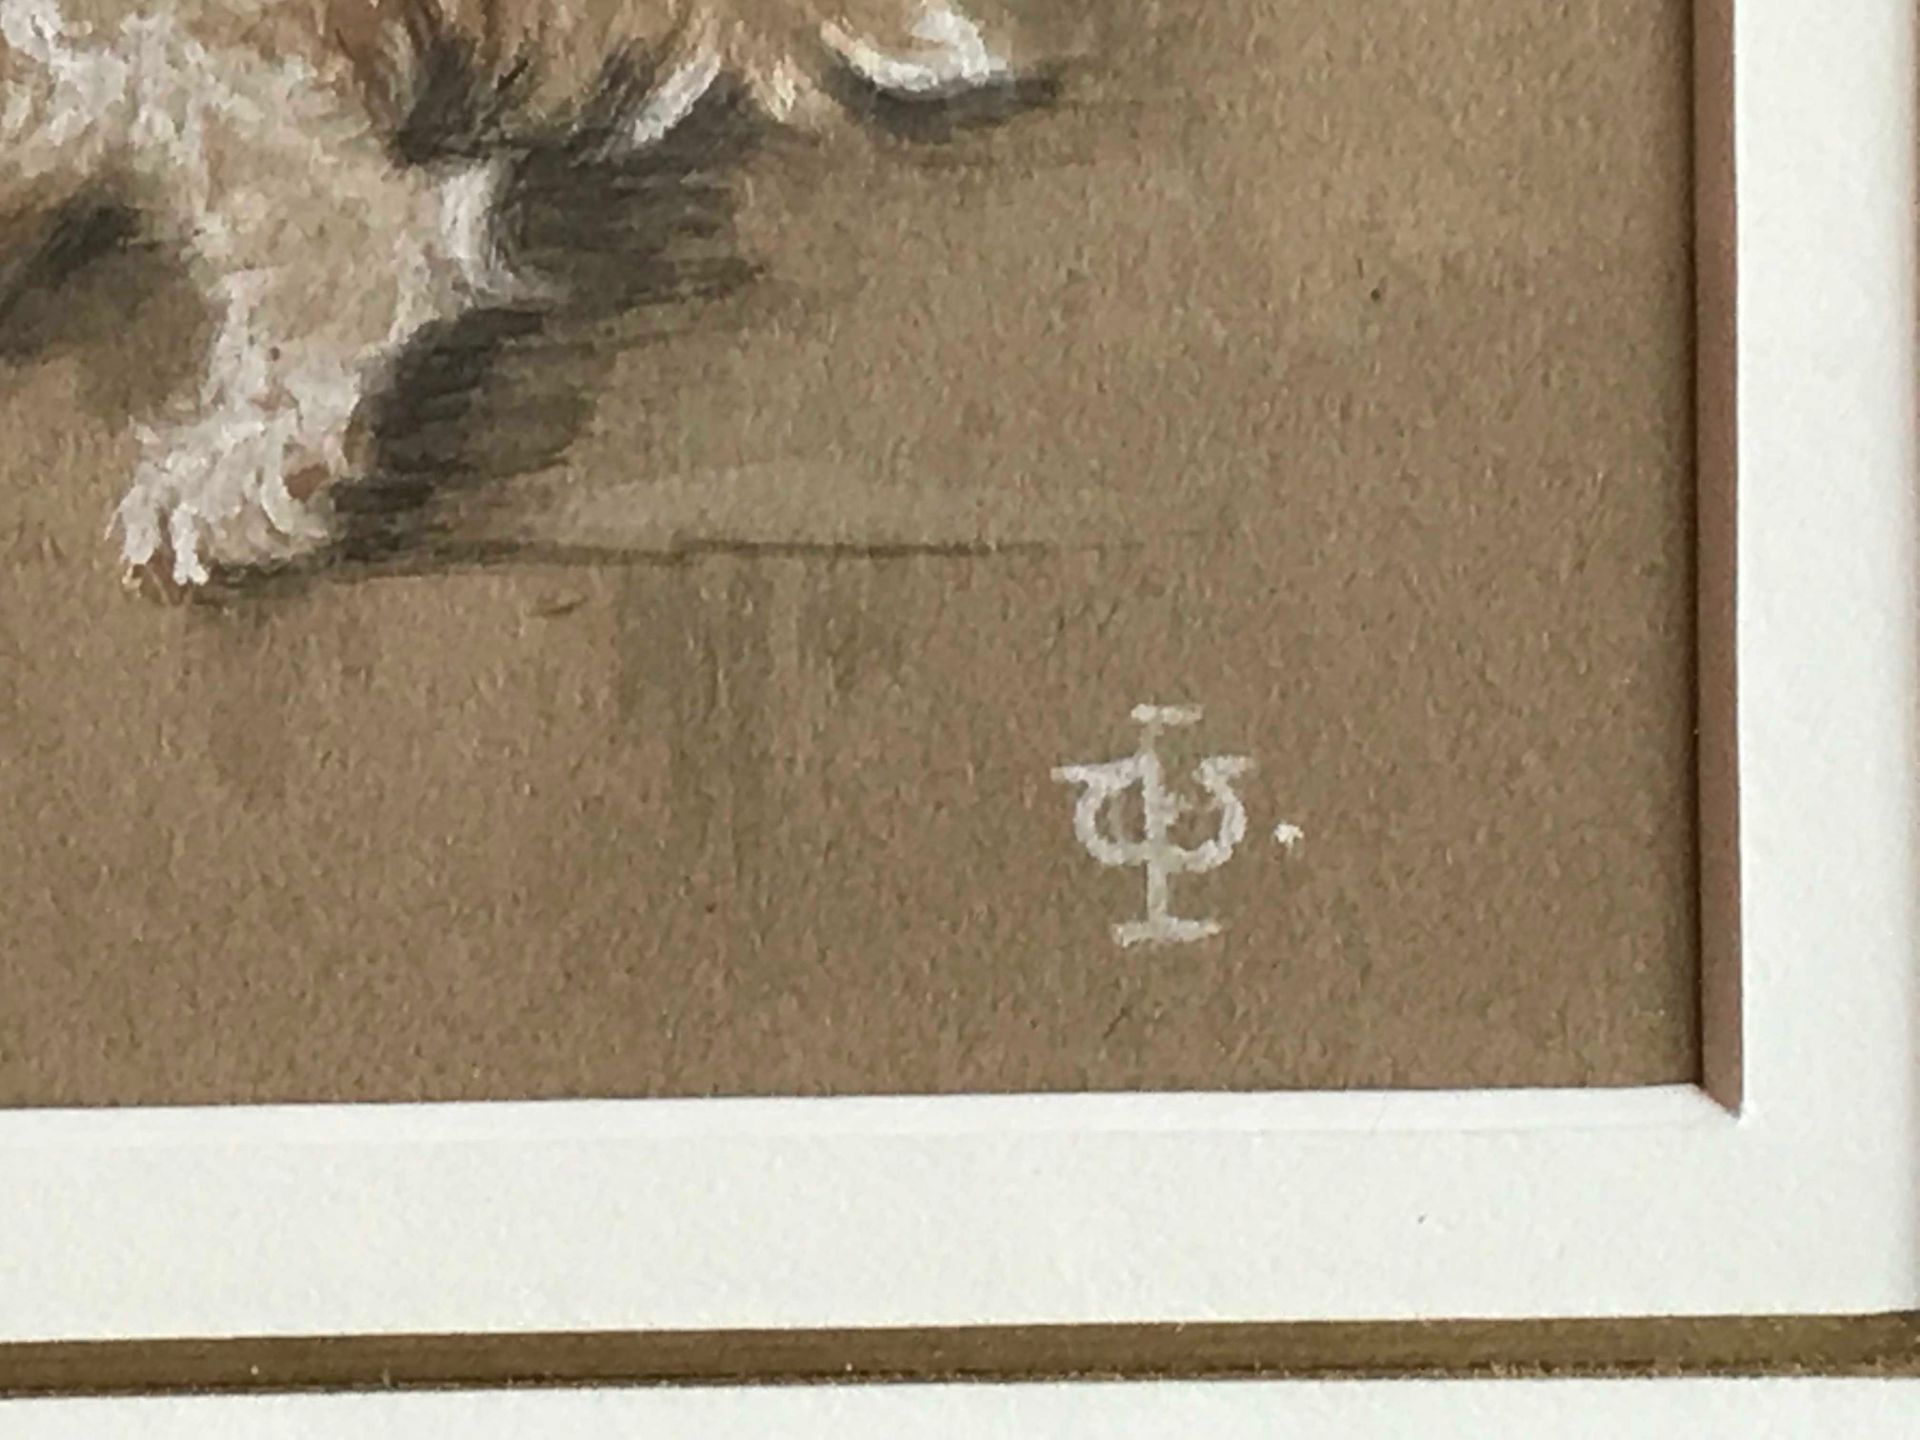 Monogramed Watercolour, Dog study - Image 2 of 3